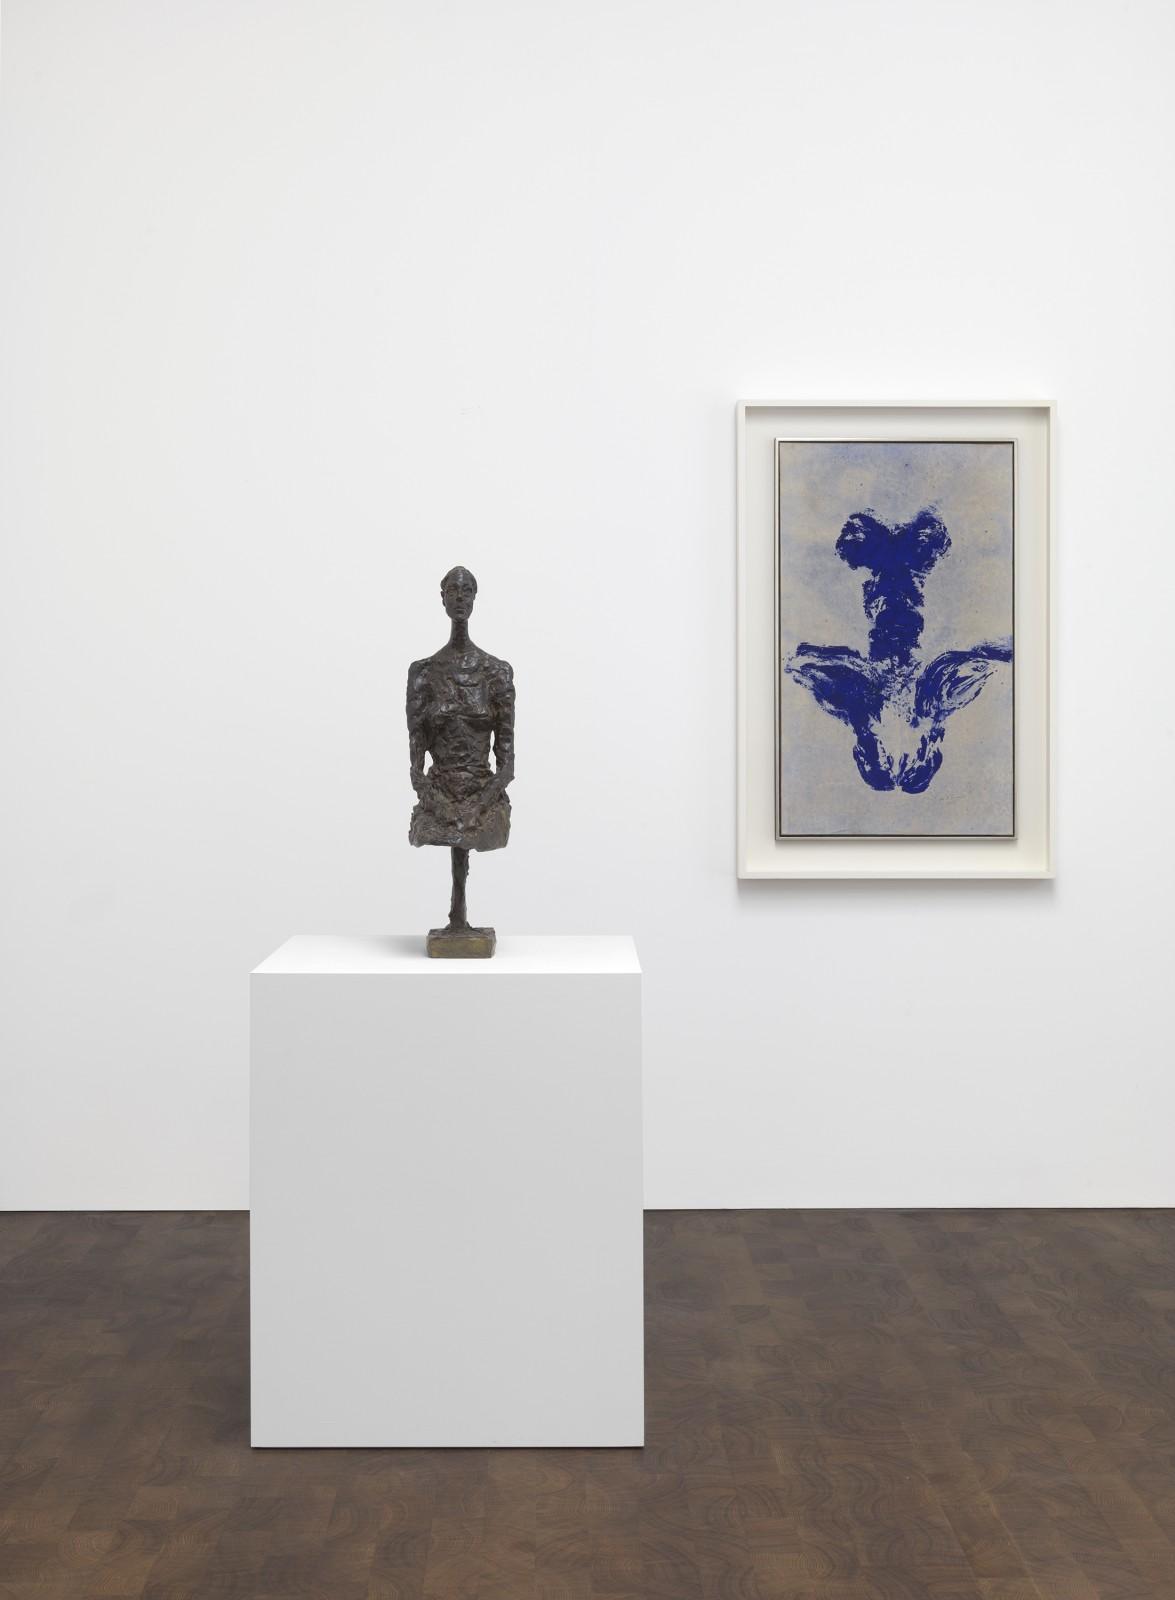 Vue de l'exposition "Alberto Giacometti, Yves Klein - In search of the Absolute", Gagosian Gallery, 2016